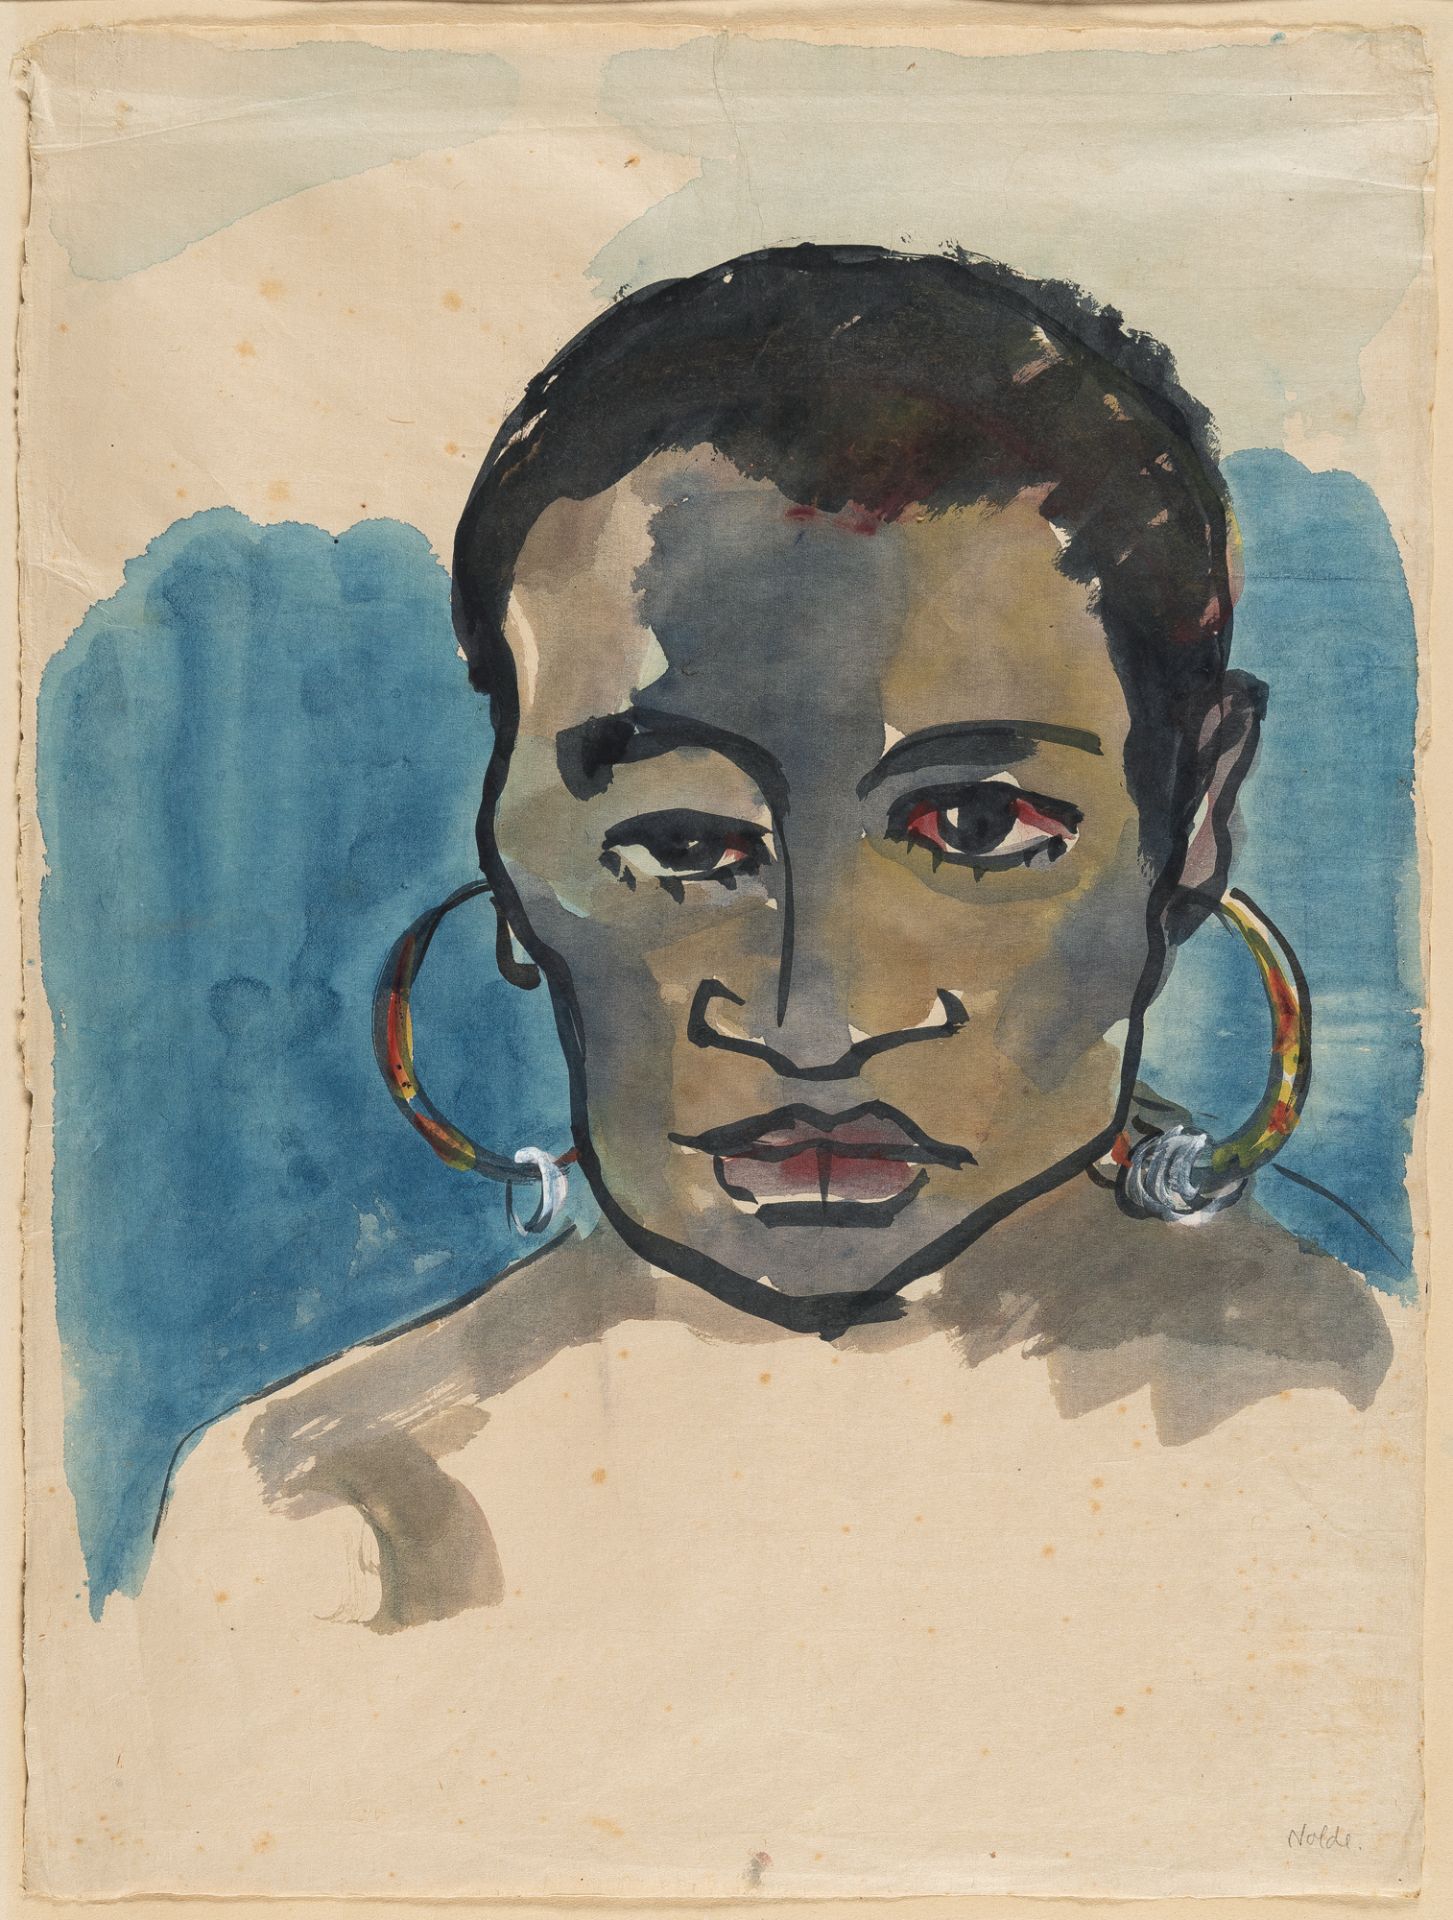 Emil Nolde (1867 Nolde - Seebüll 1956), “Papua woman”Watercolour and Indian ink on Japanese laid - Image 2 of 4